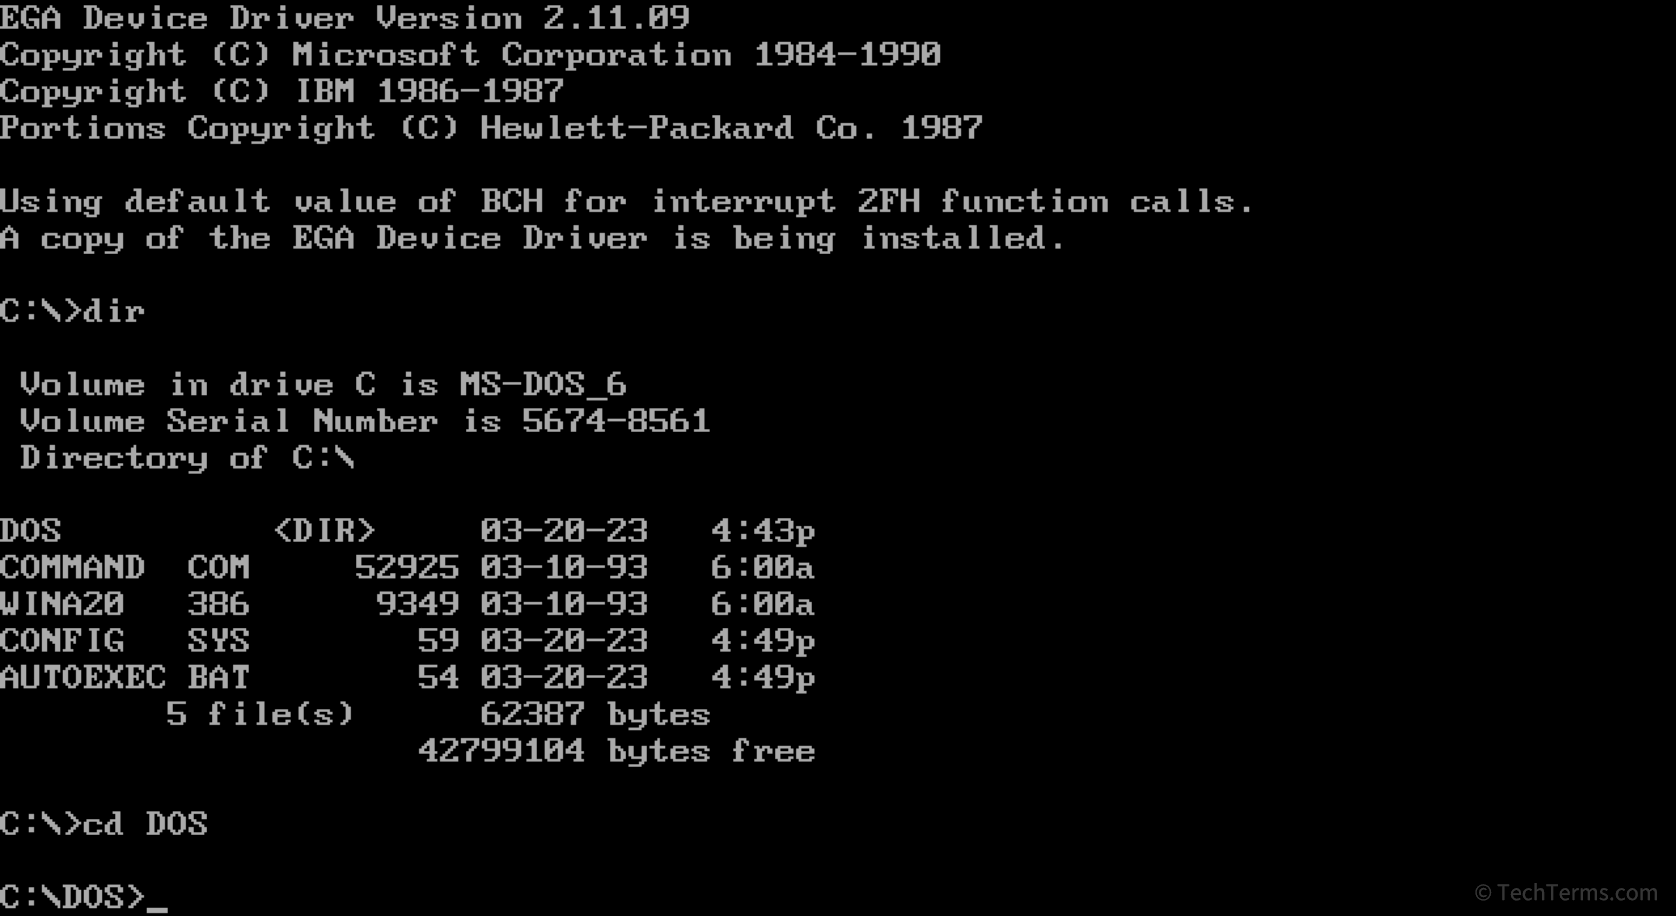 The DOS command prompt